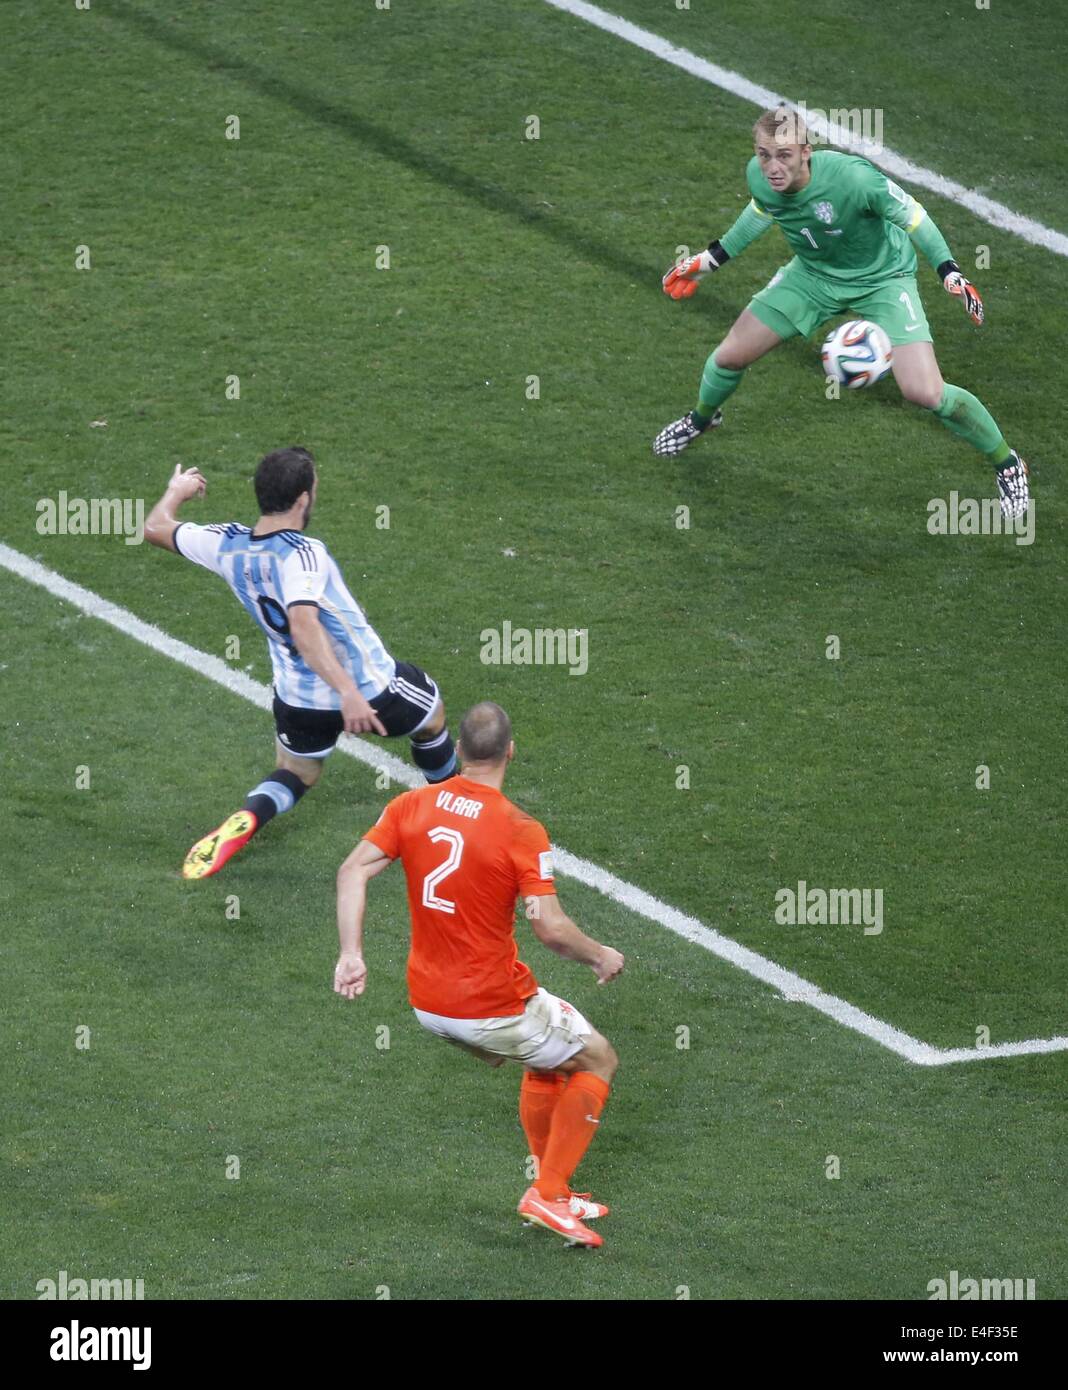 Sao Paulo, Brazil. 9th July, 2014. Netherlands' goalkeeper Jasper Cillessen (R) and Ron Vlaar (C) defend against Argentina's Gonzalo Higuain (L) during a semifinal match between Netherlands and Argentina of 2014 FIFA World Cup at the Arena de Sao Paulo Stadium in Sao Paulo, Brazil, on July 9, 2014. Credit:  Liao Yujie/Xinhua/Alamy Live News Stock Photo